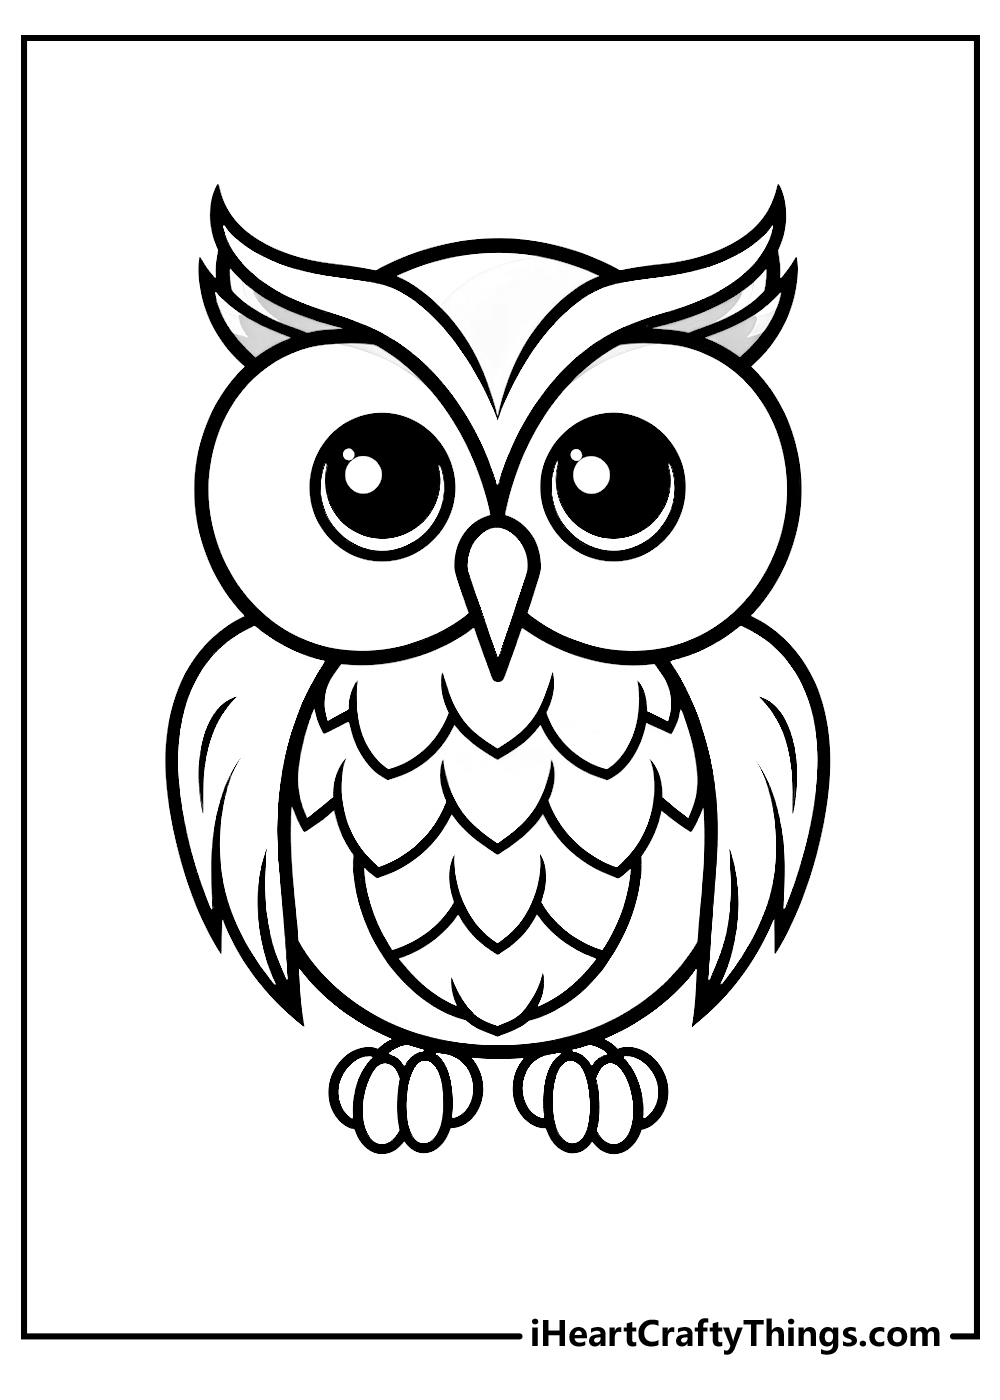 30 Wise Owl Coloring Pages (100% Free Printables) pertaining to Free Owl Printables